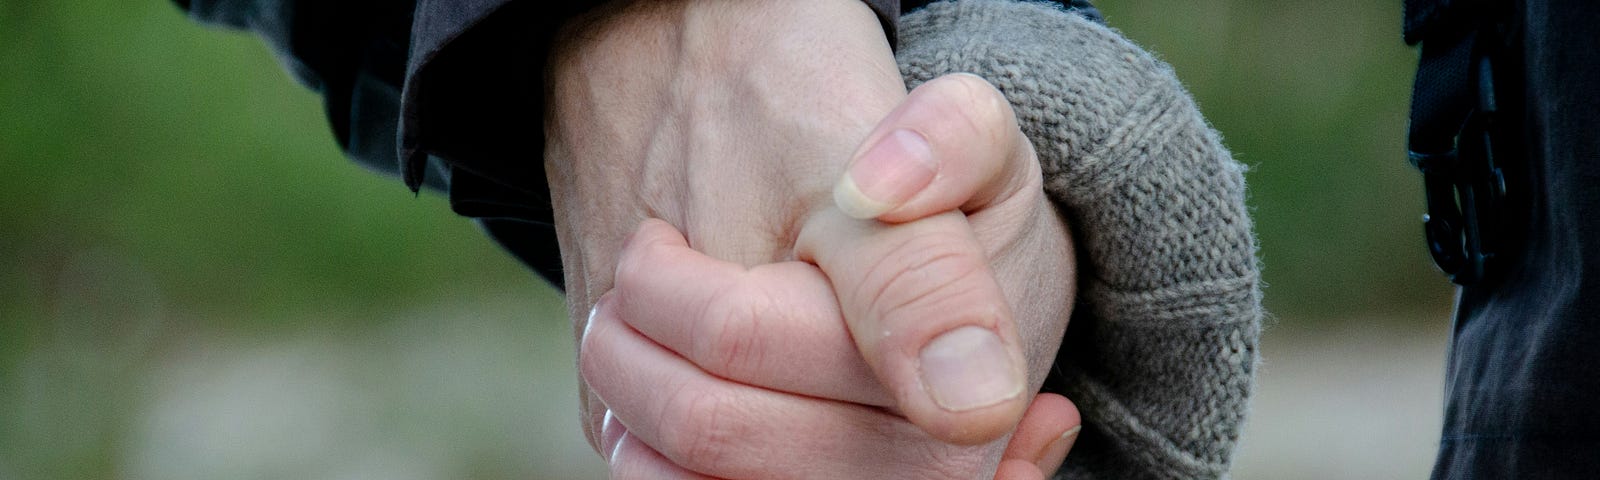 Photo of hands holding showing a ring on one finger